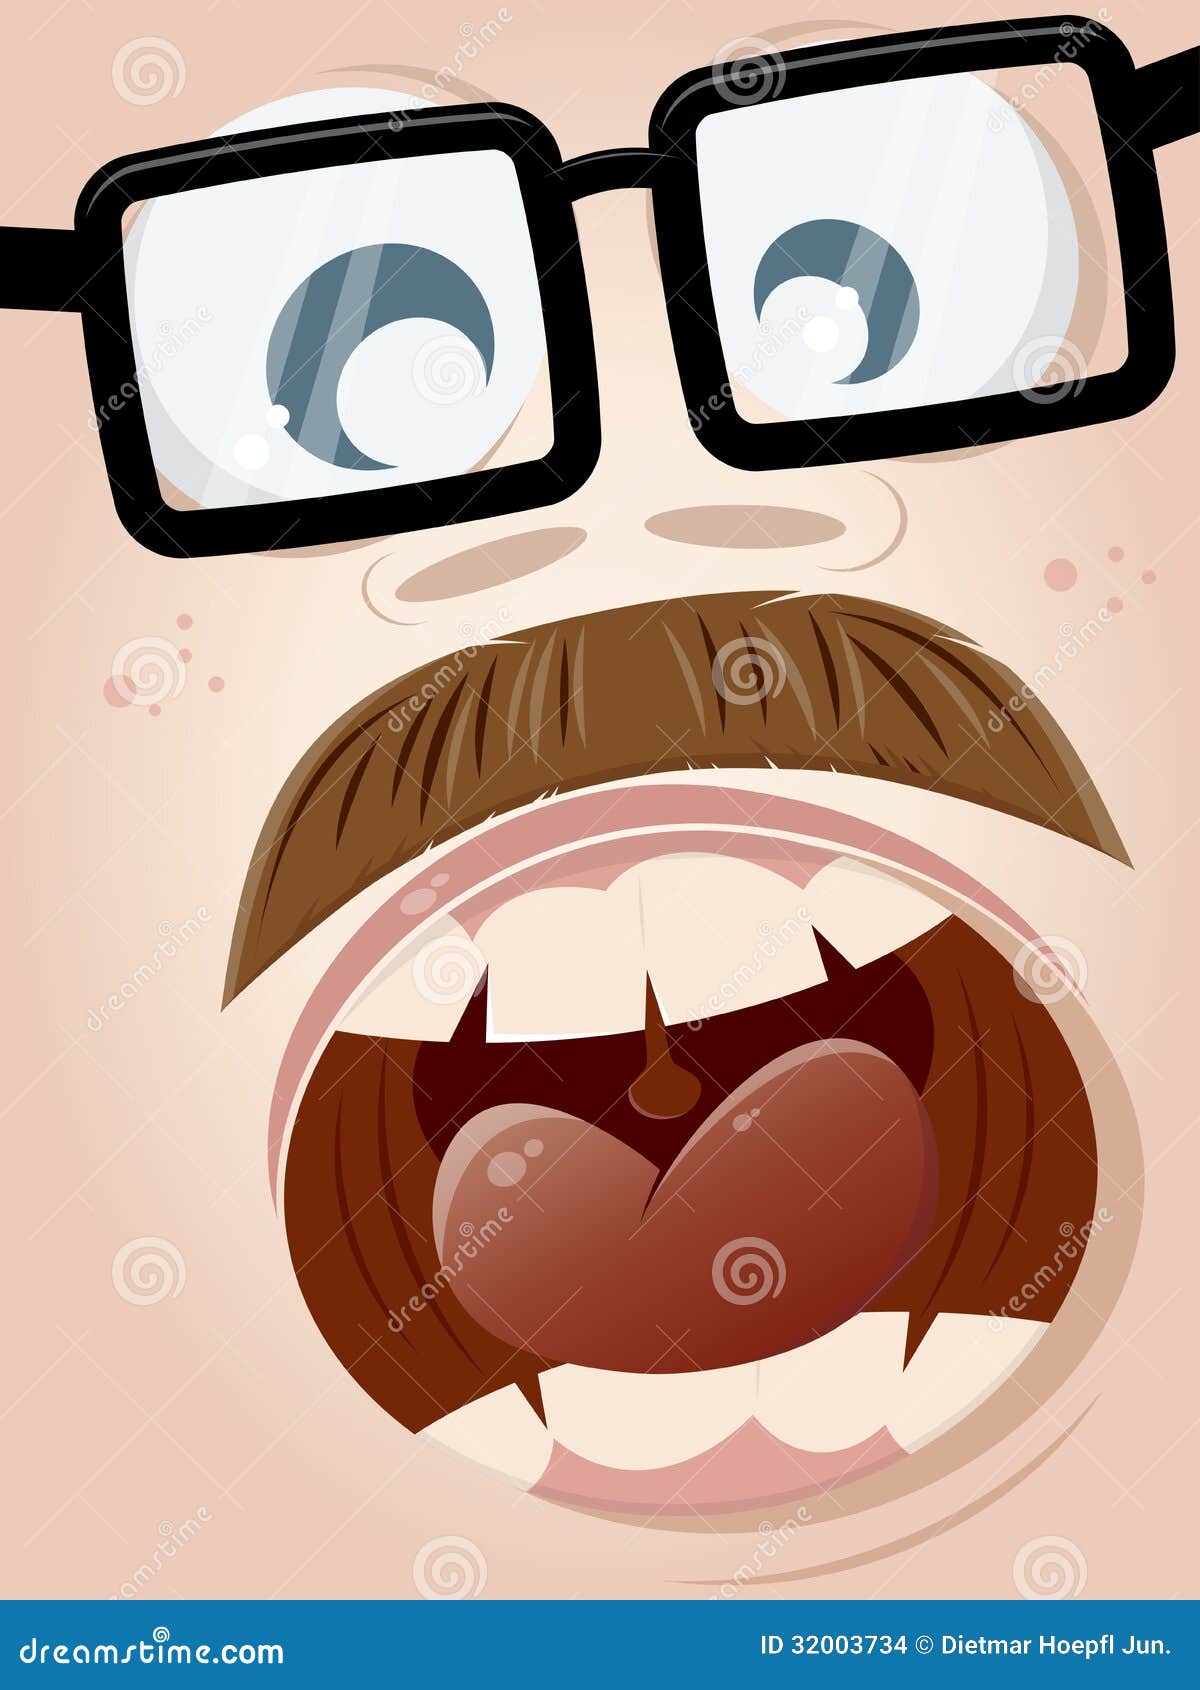 Screaming Cartoon Face Stock Images - Image: 32003734